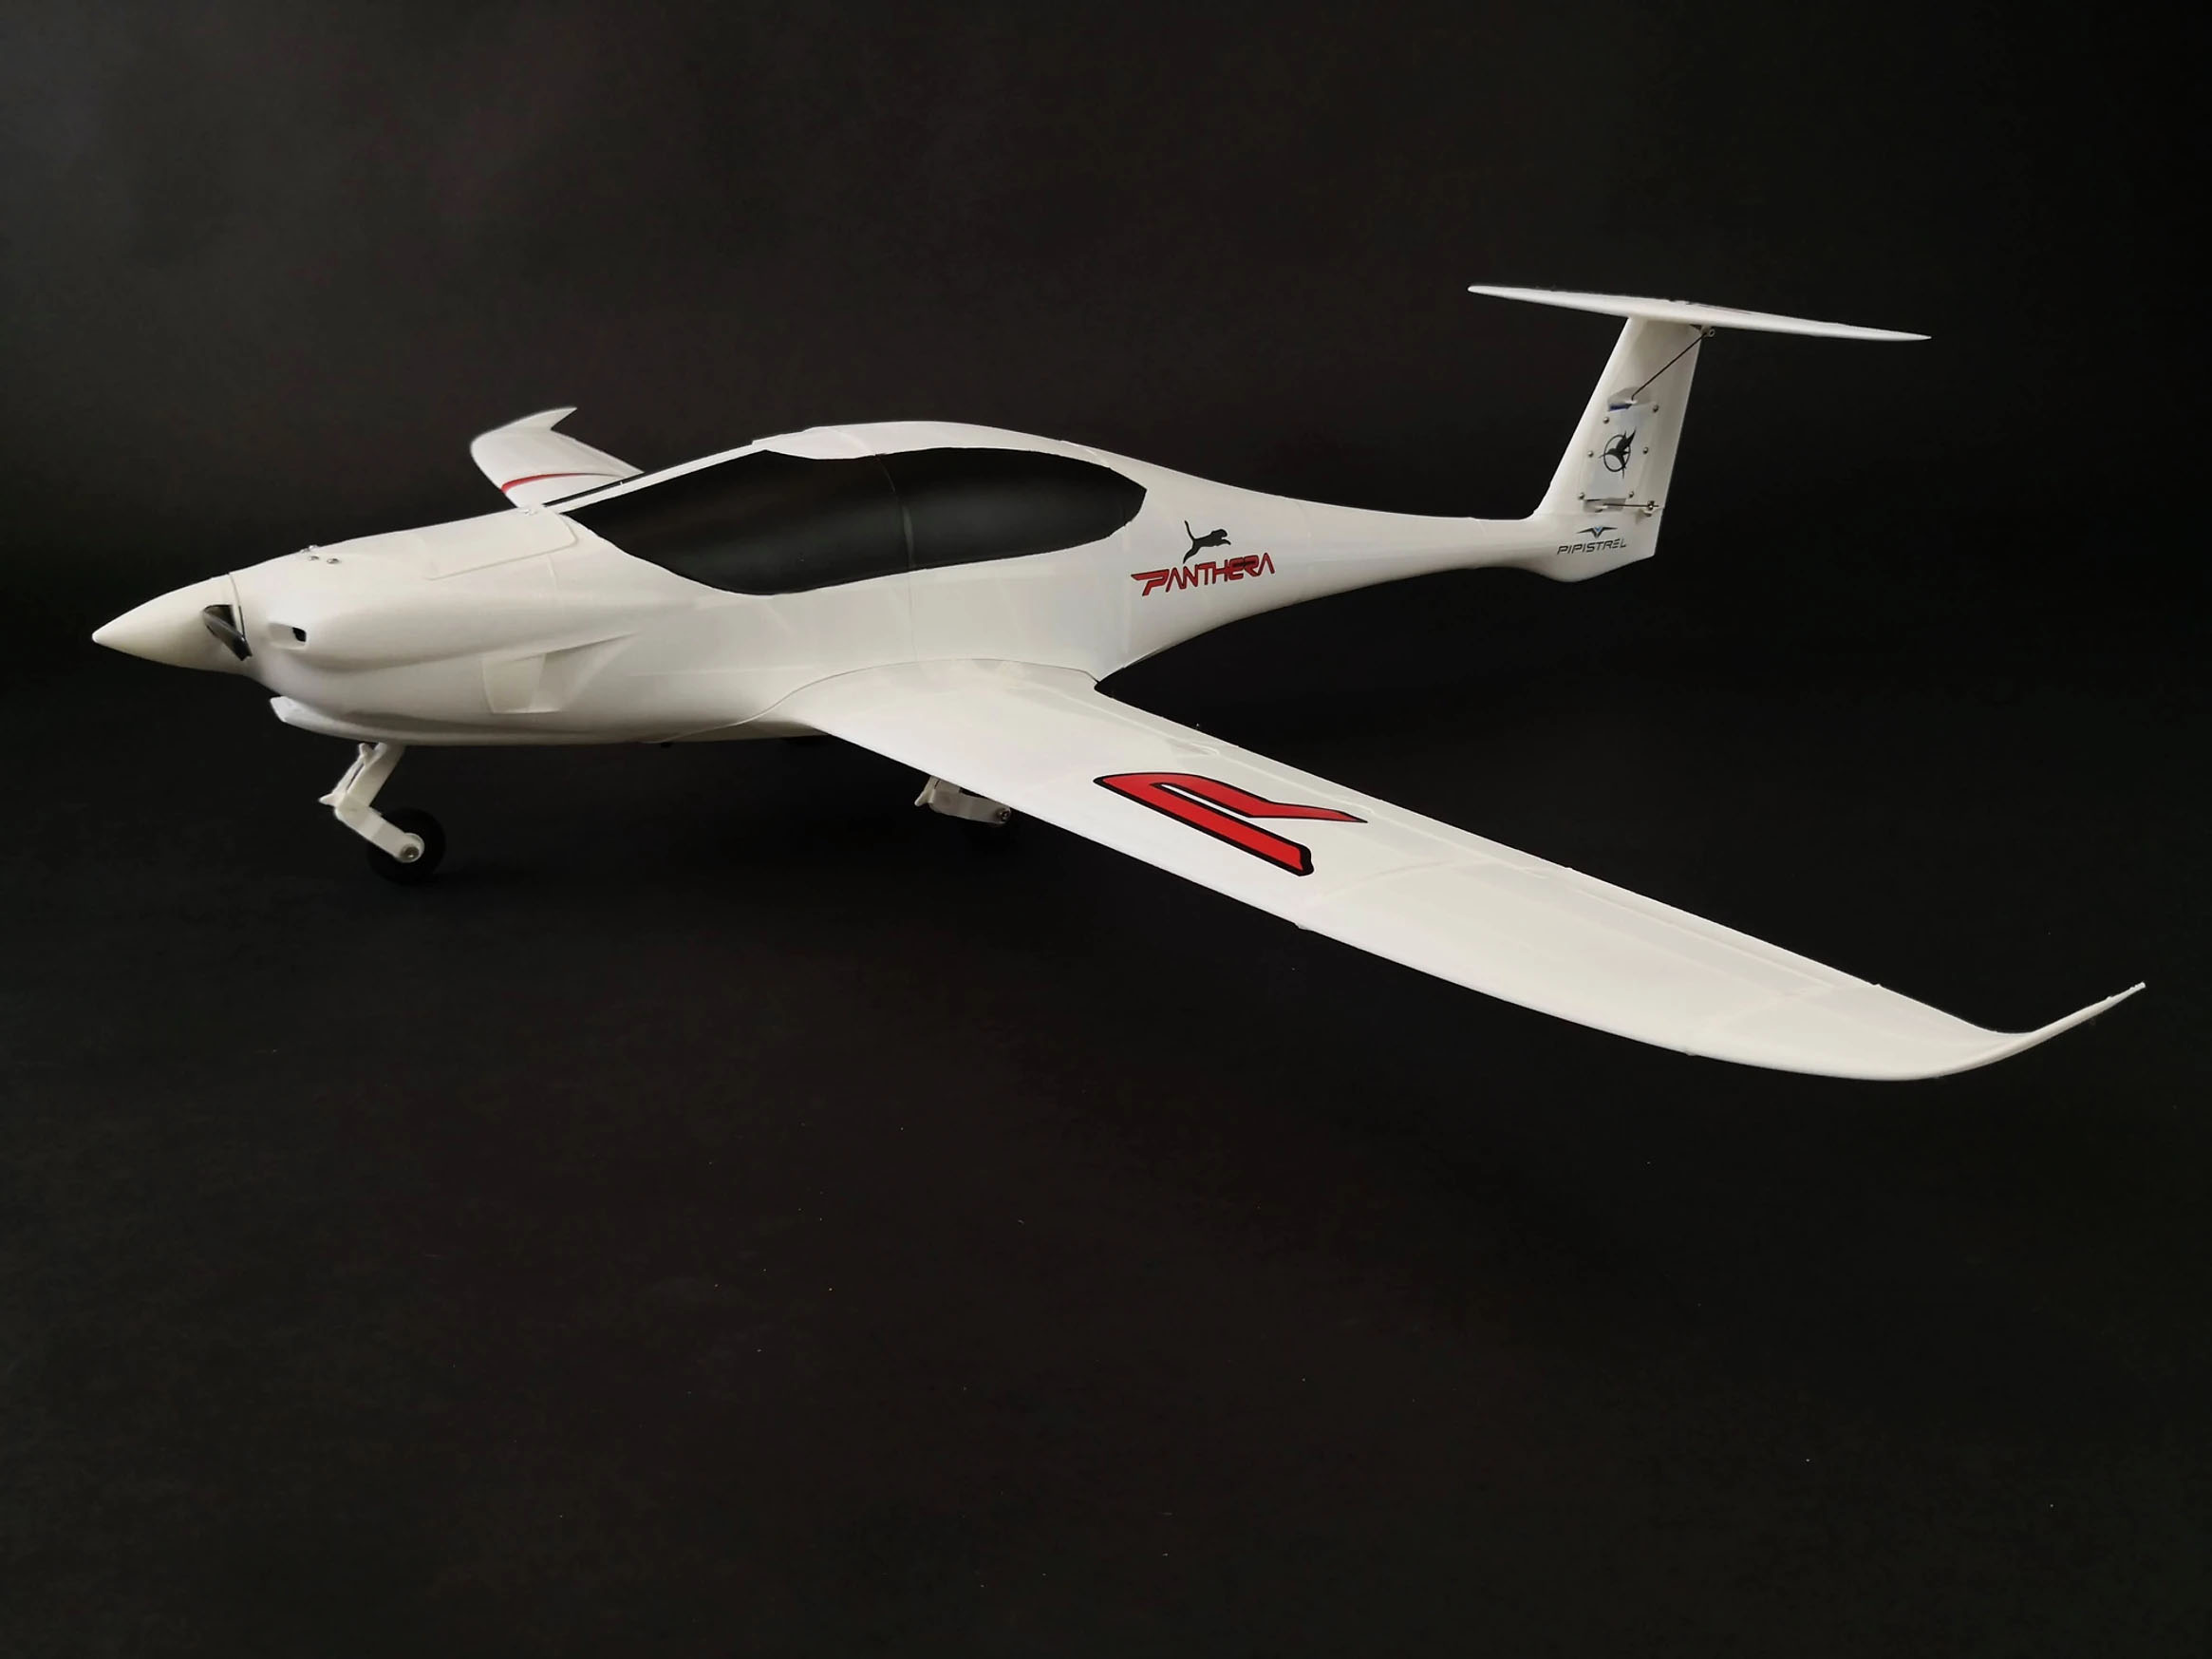 Panthera V2 Eclipson Airplanes